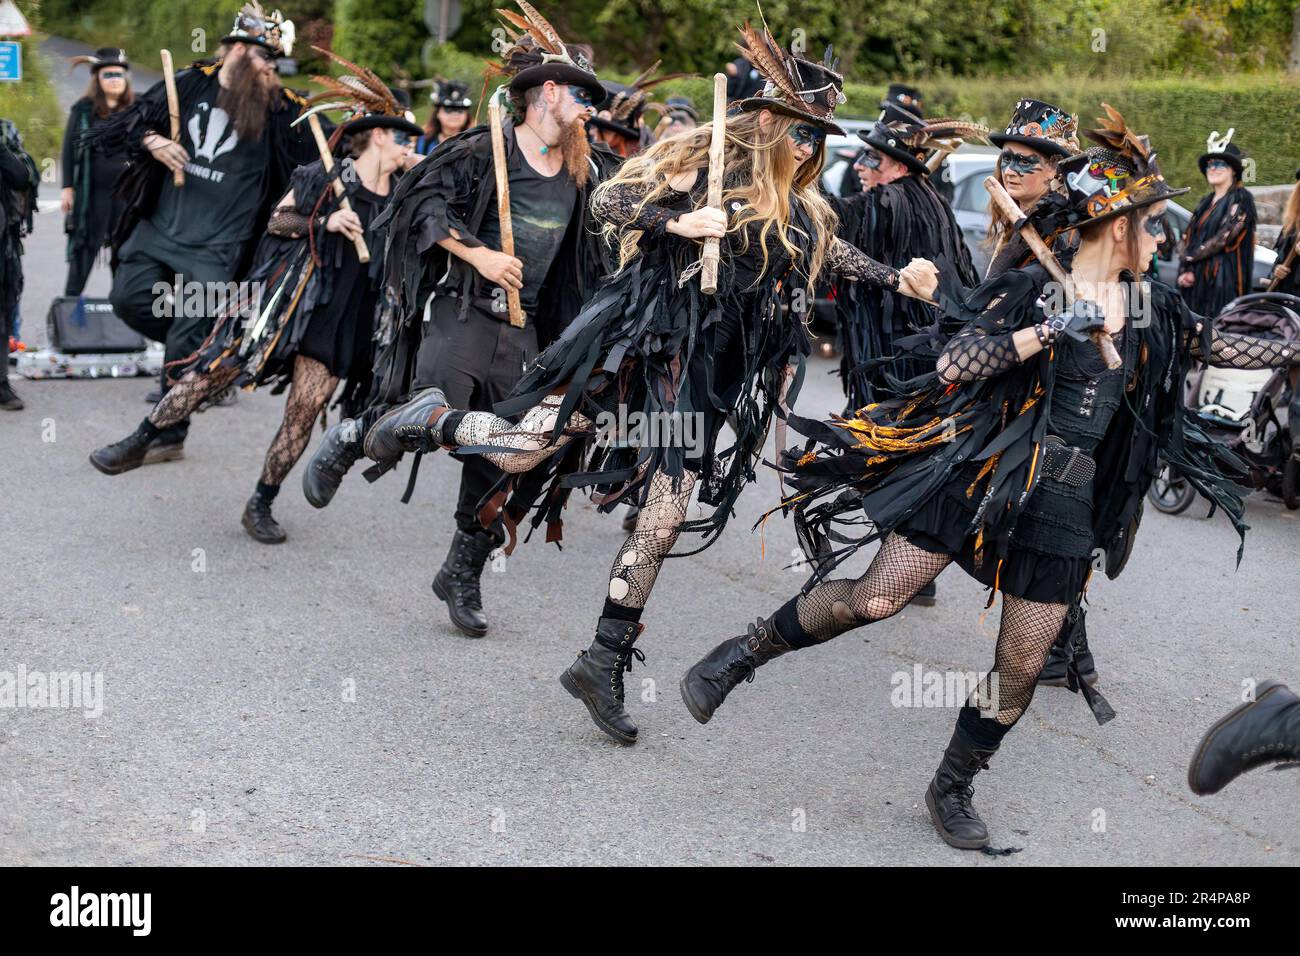 The Beltane Border Morris pictured during an evening performance on the edge of Dartmoor, Devon, UK. Stock Photo